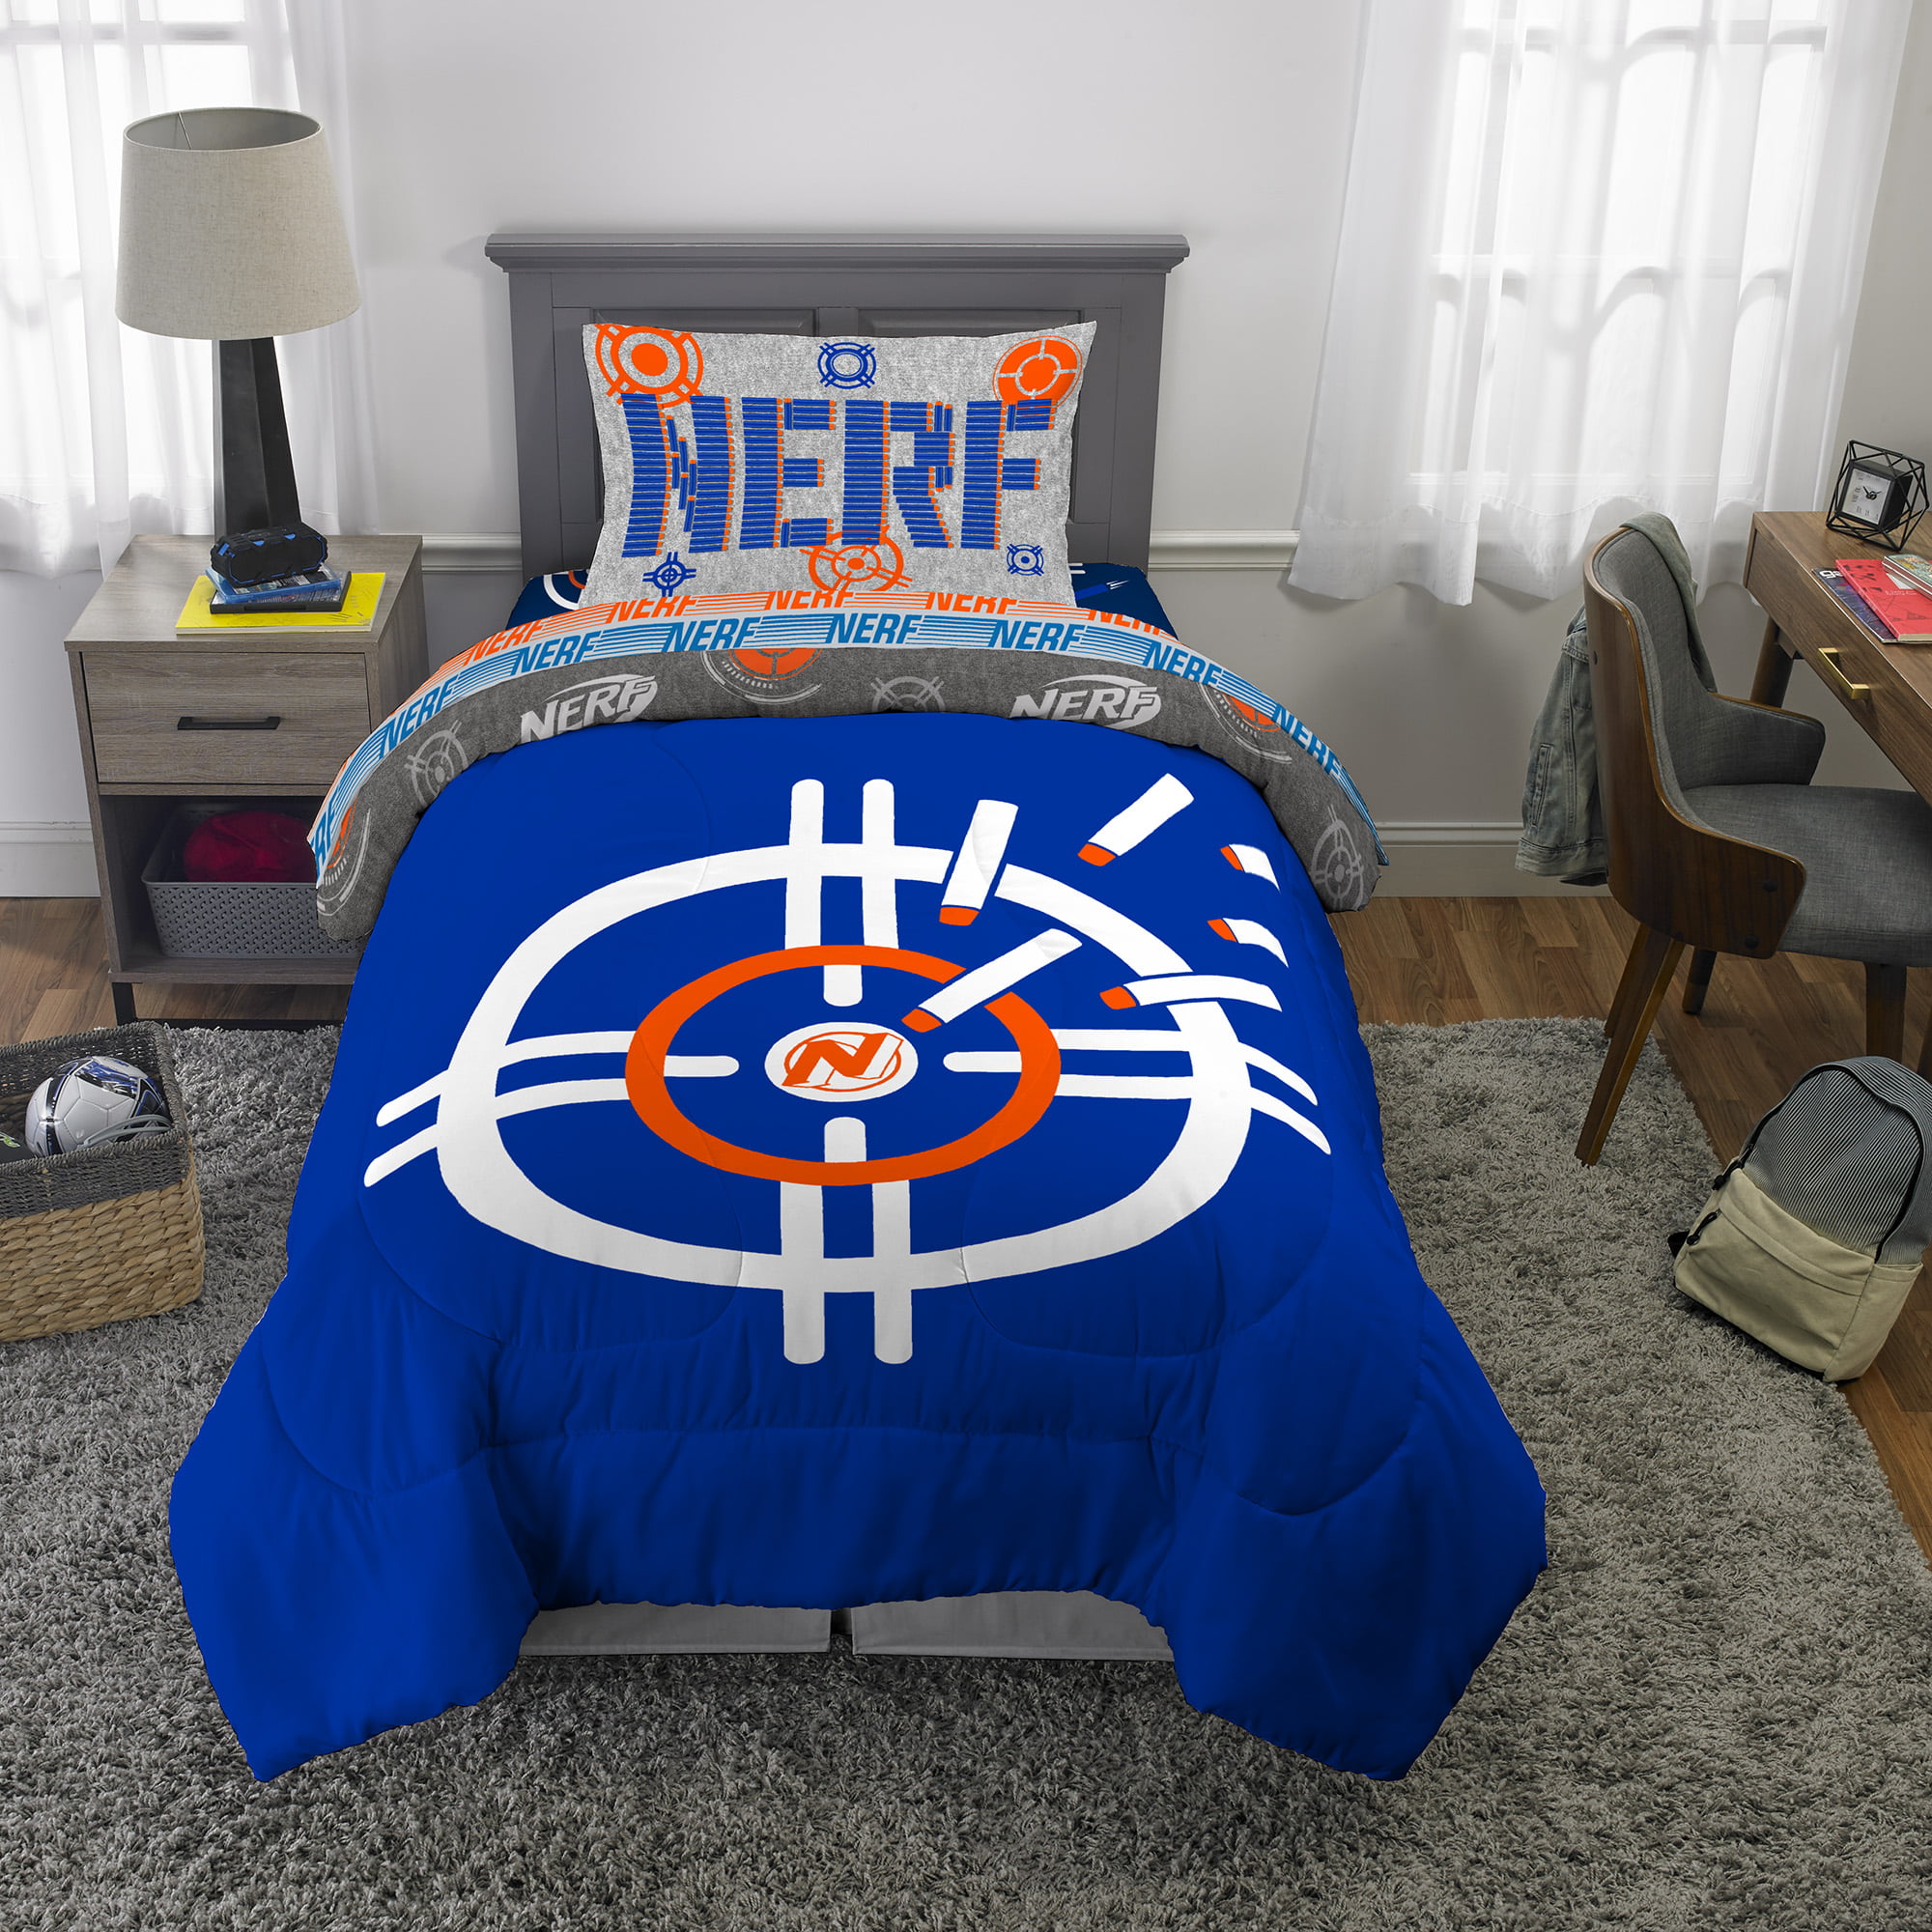 Hasbro Nerf Bed In A Bag Kids Bedding, Knicks Bedding Twin